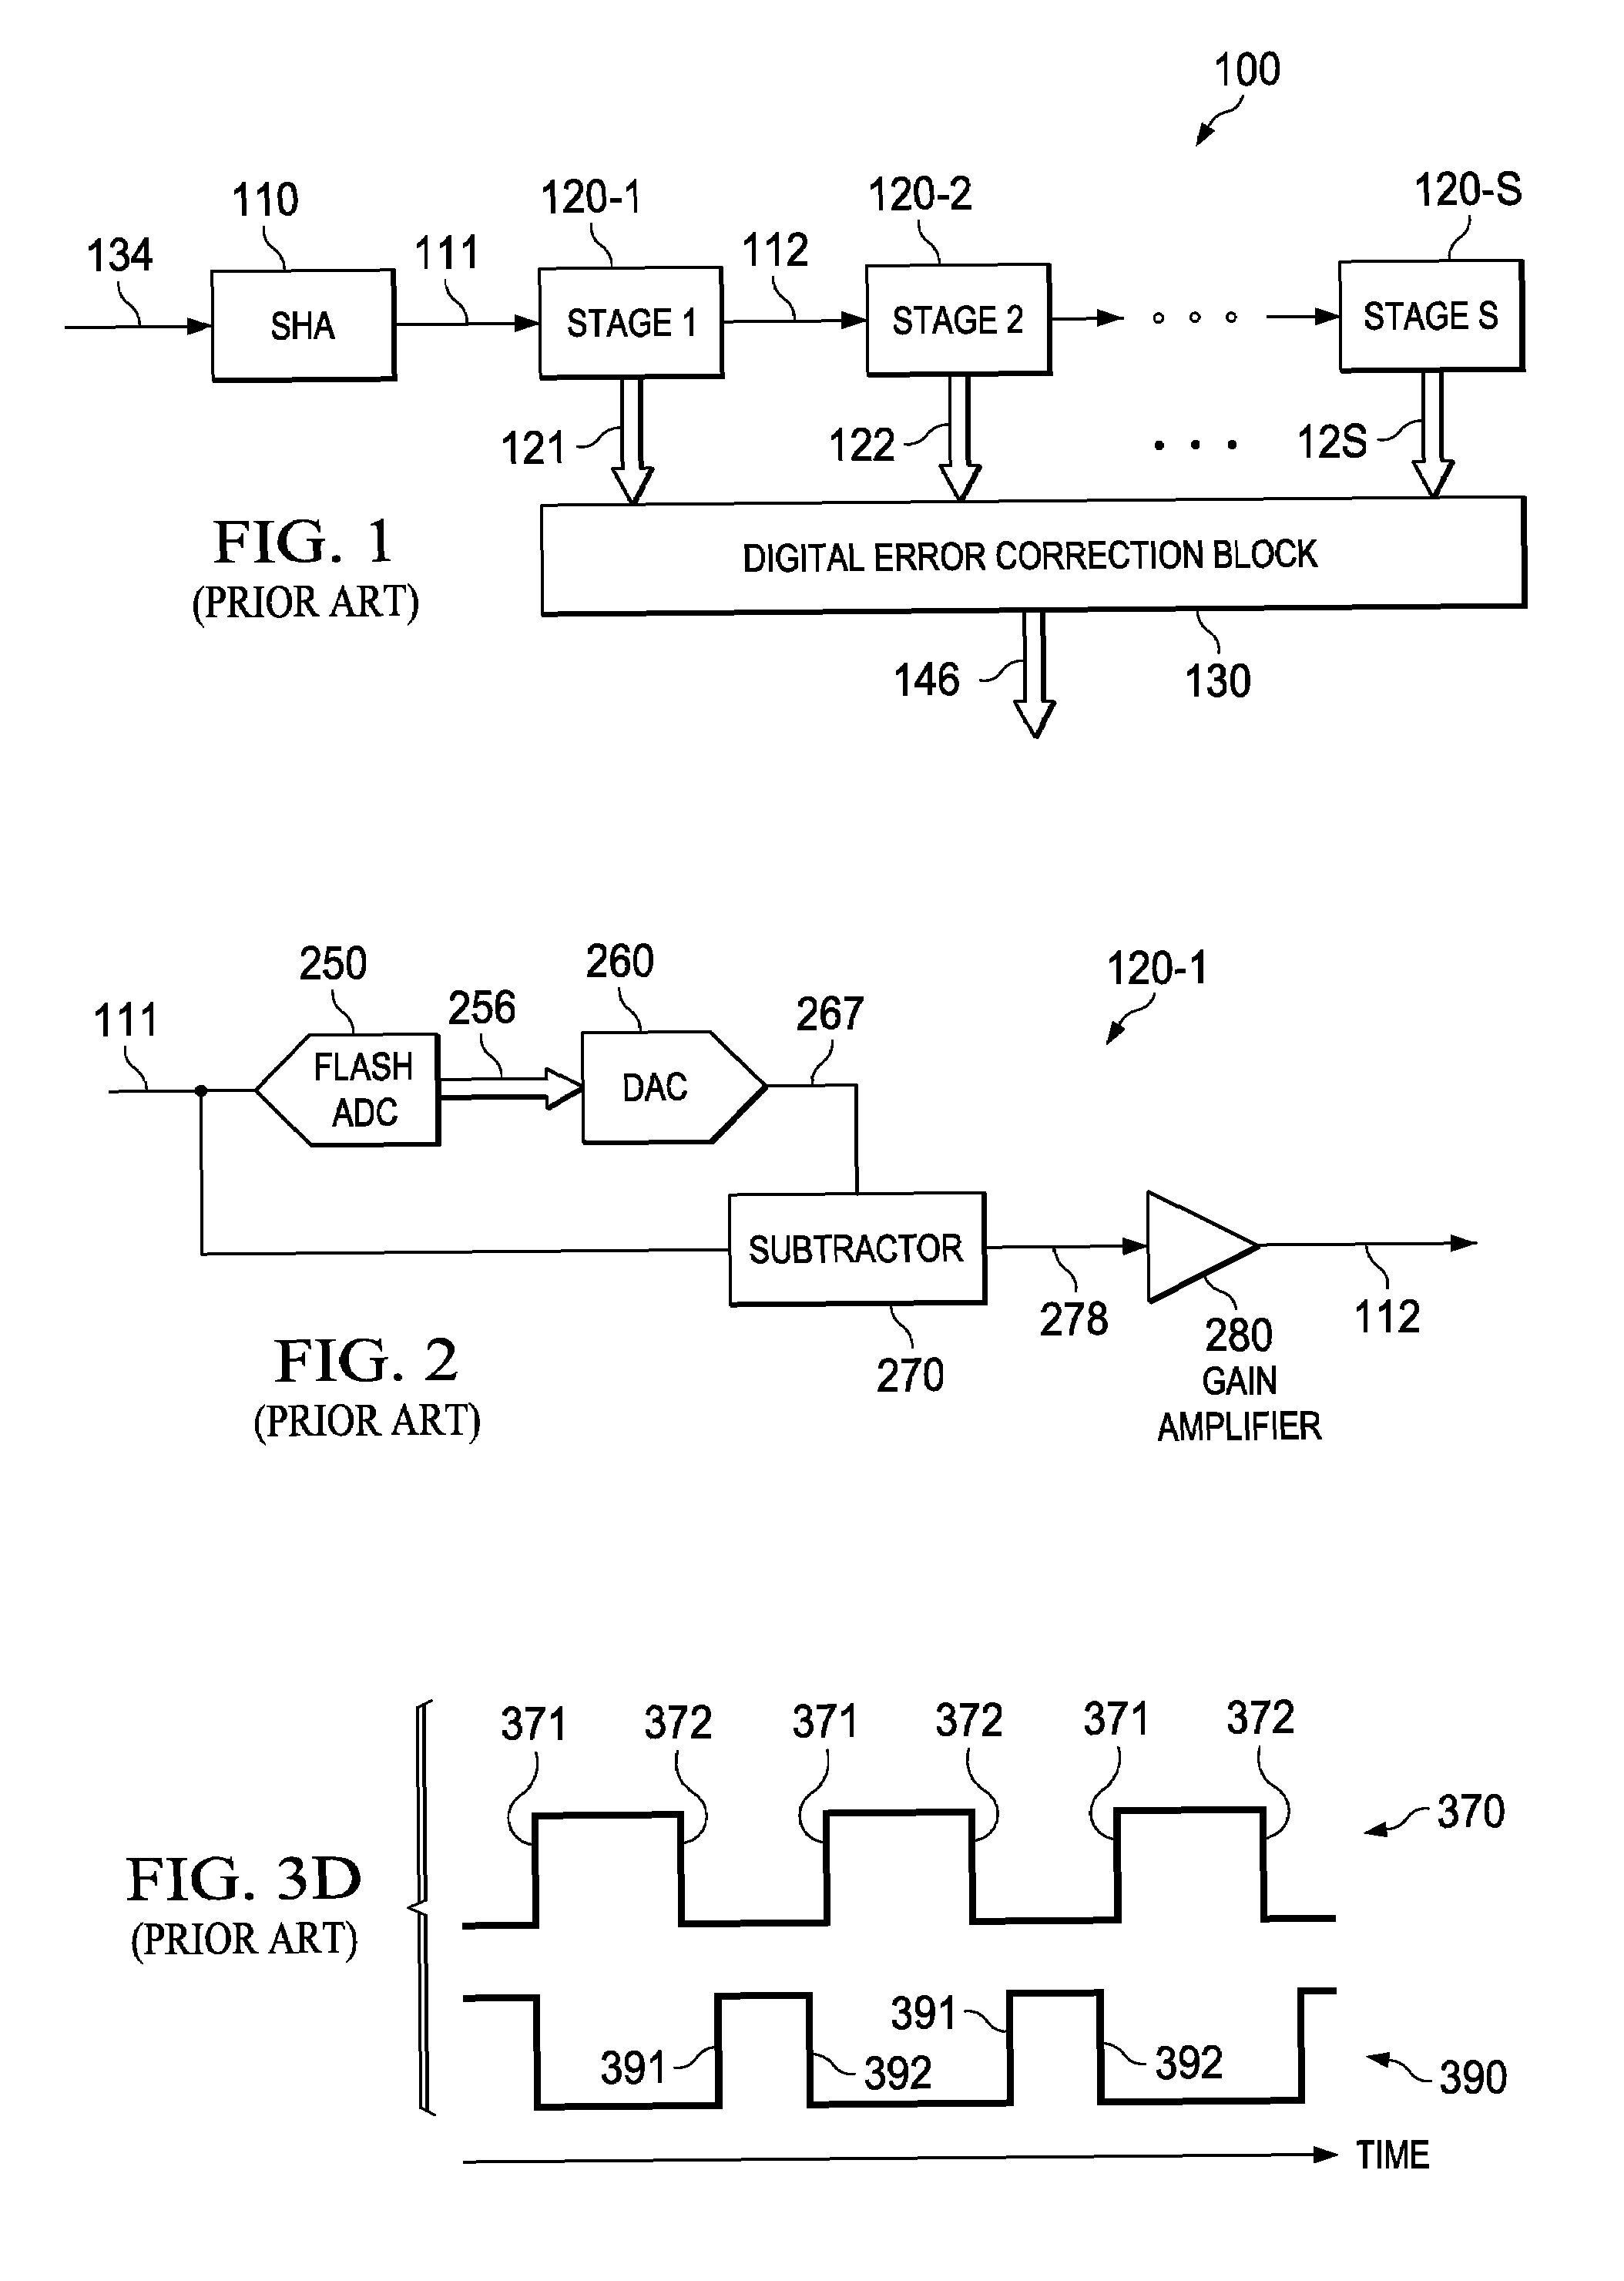 Reducing noise and/or power consumption in a switched capacitor amplifier sampling a reference voltage